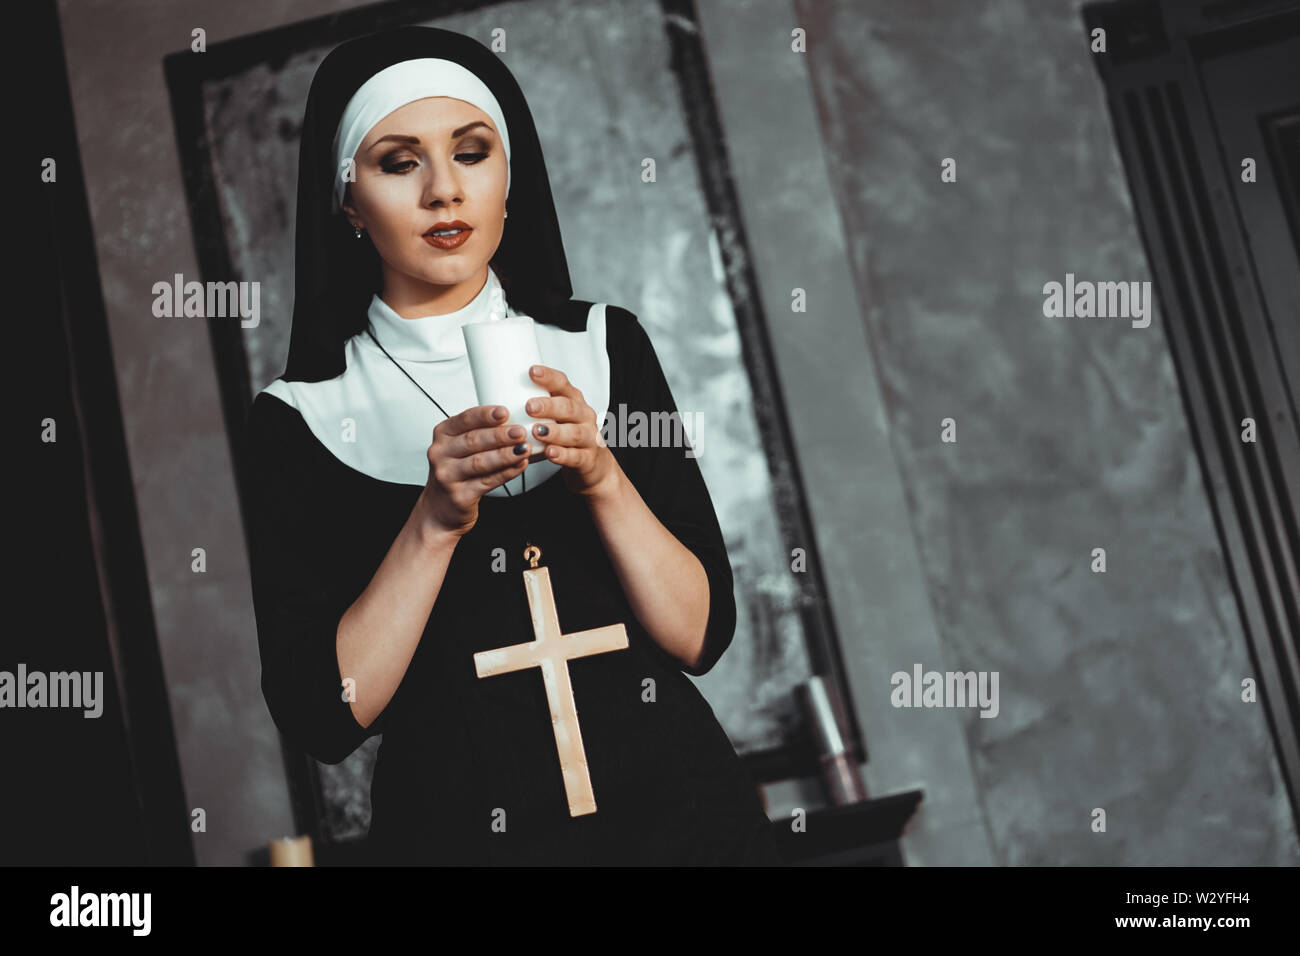 Young catholic nun is holding candle in her hands. Photo on black background. Side view. Stock Photo